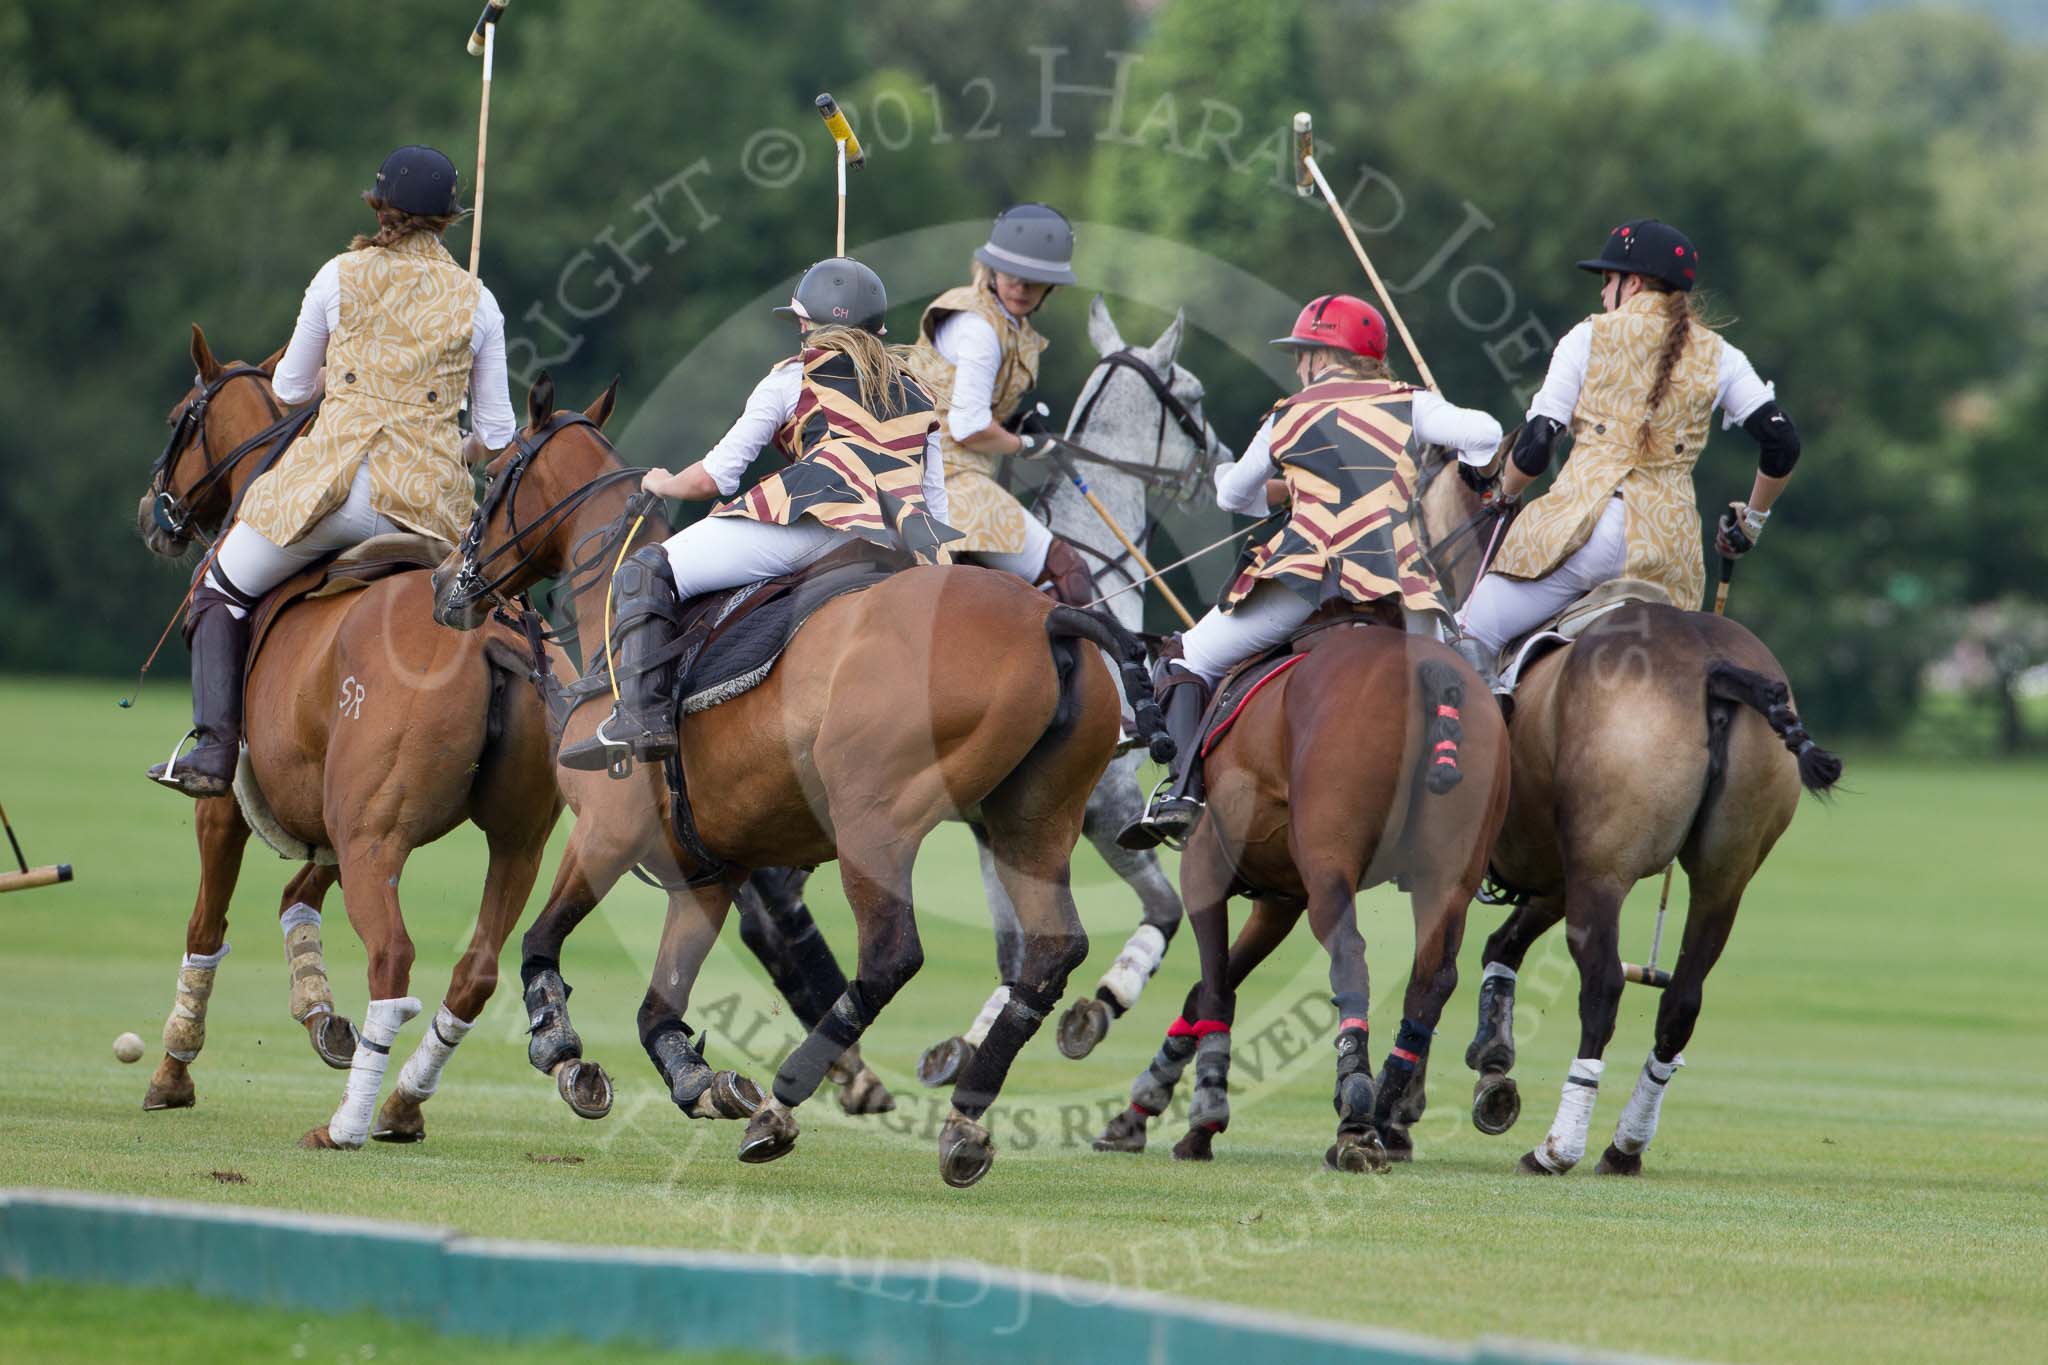 7th Heritage Polo Cup finals: The Amazons of Polo v The Ladies of the British Empire..
Hurtwood Park Polo Club,
Ewhurst Green,
Surrey,
United Kingdom,
on 05 August 2012 at 15:15, image #139